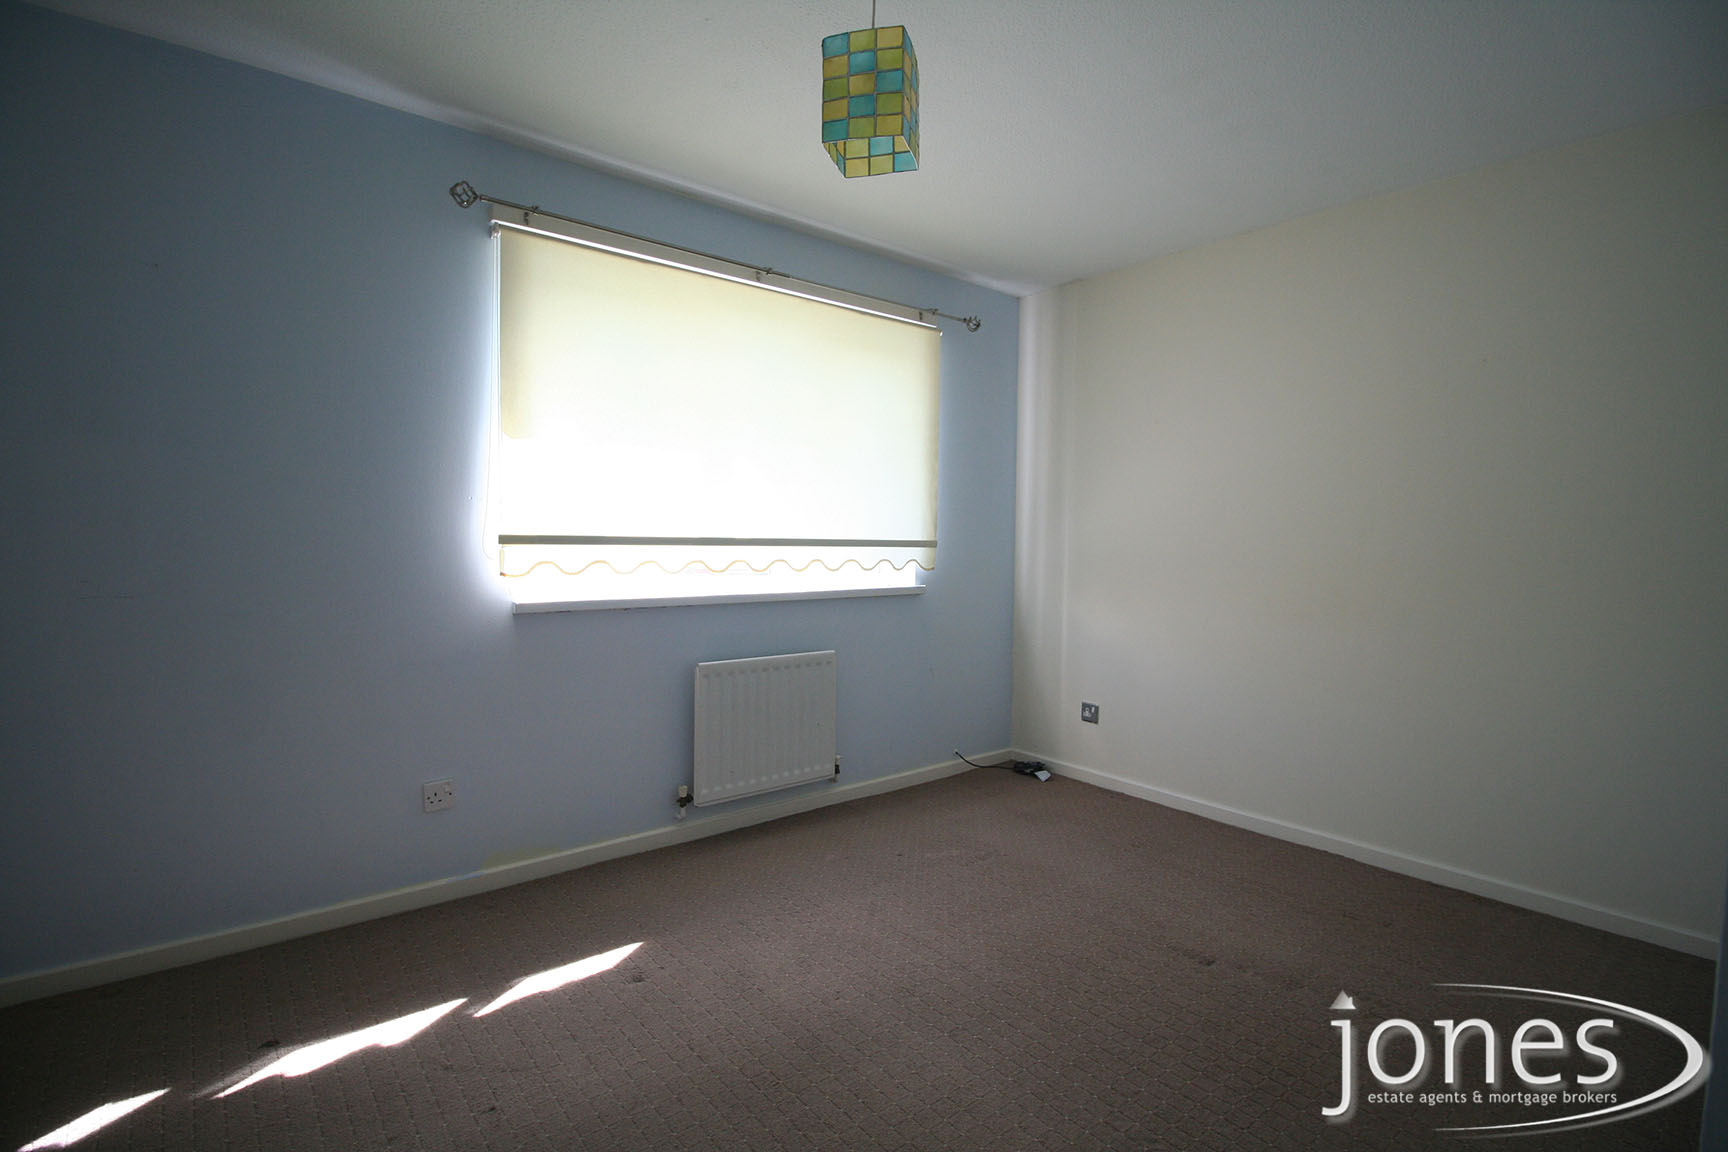 Home for Sale Let - Photo 06 Gatesgarth Close,  Bakers Mead, Hartlepool, TS24 8RB